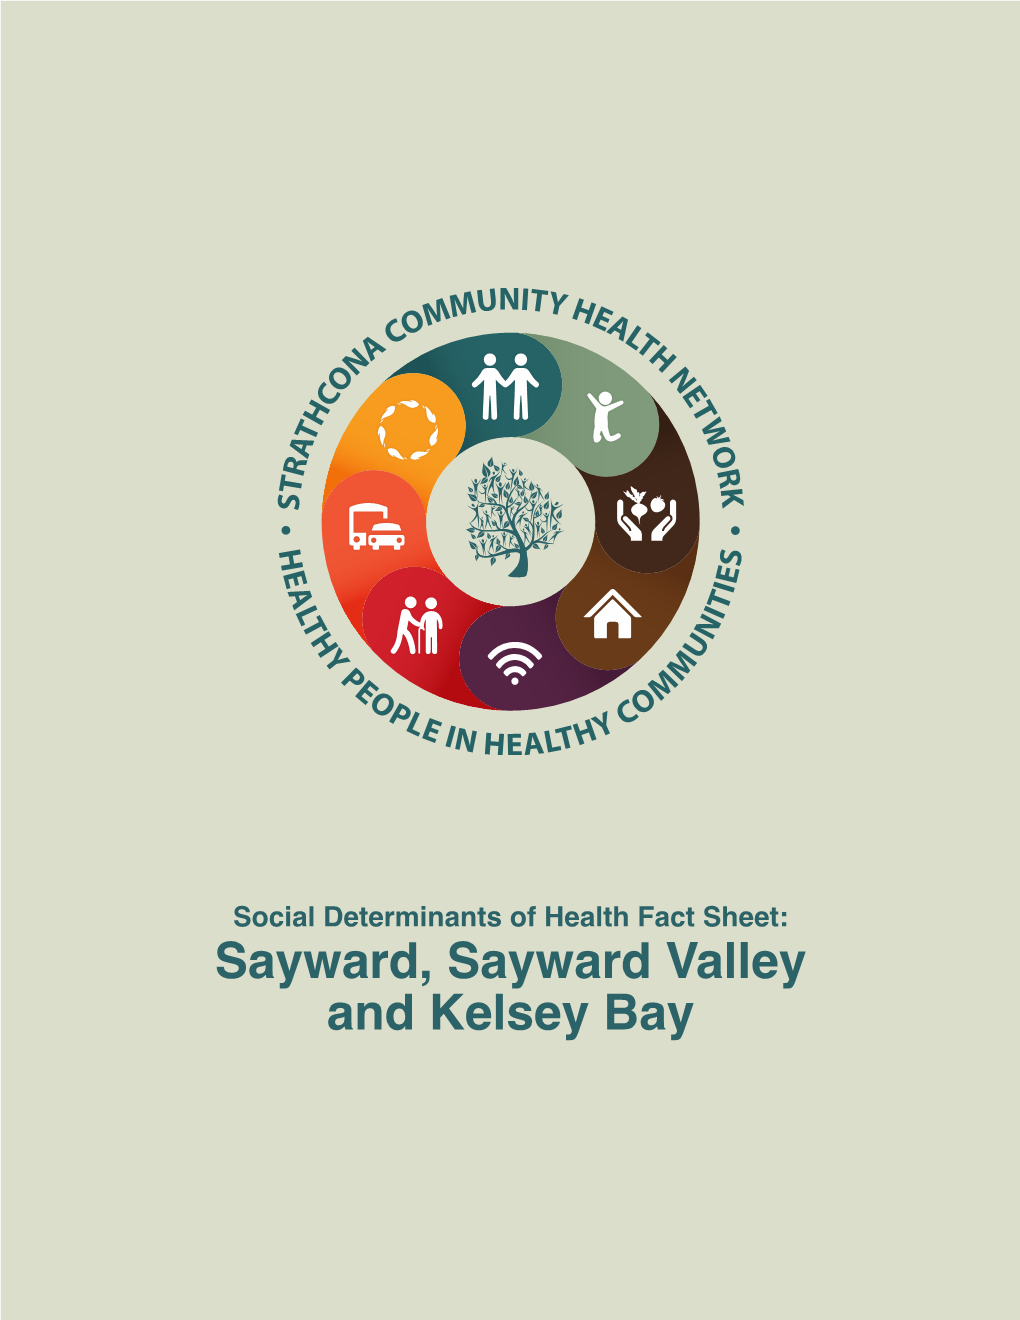 Sayward, Sayward Valley and Kelsey Bay the Strathcona Community Health Network Is Pleased to Share These Community Health Profiles